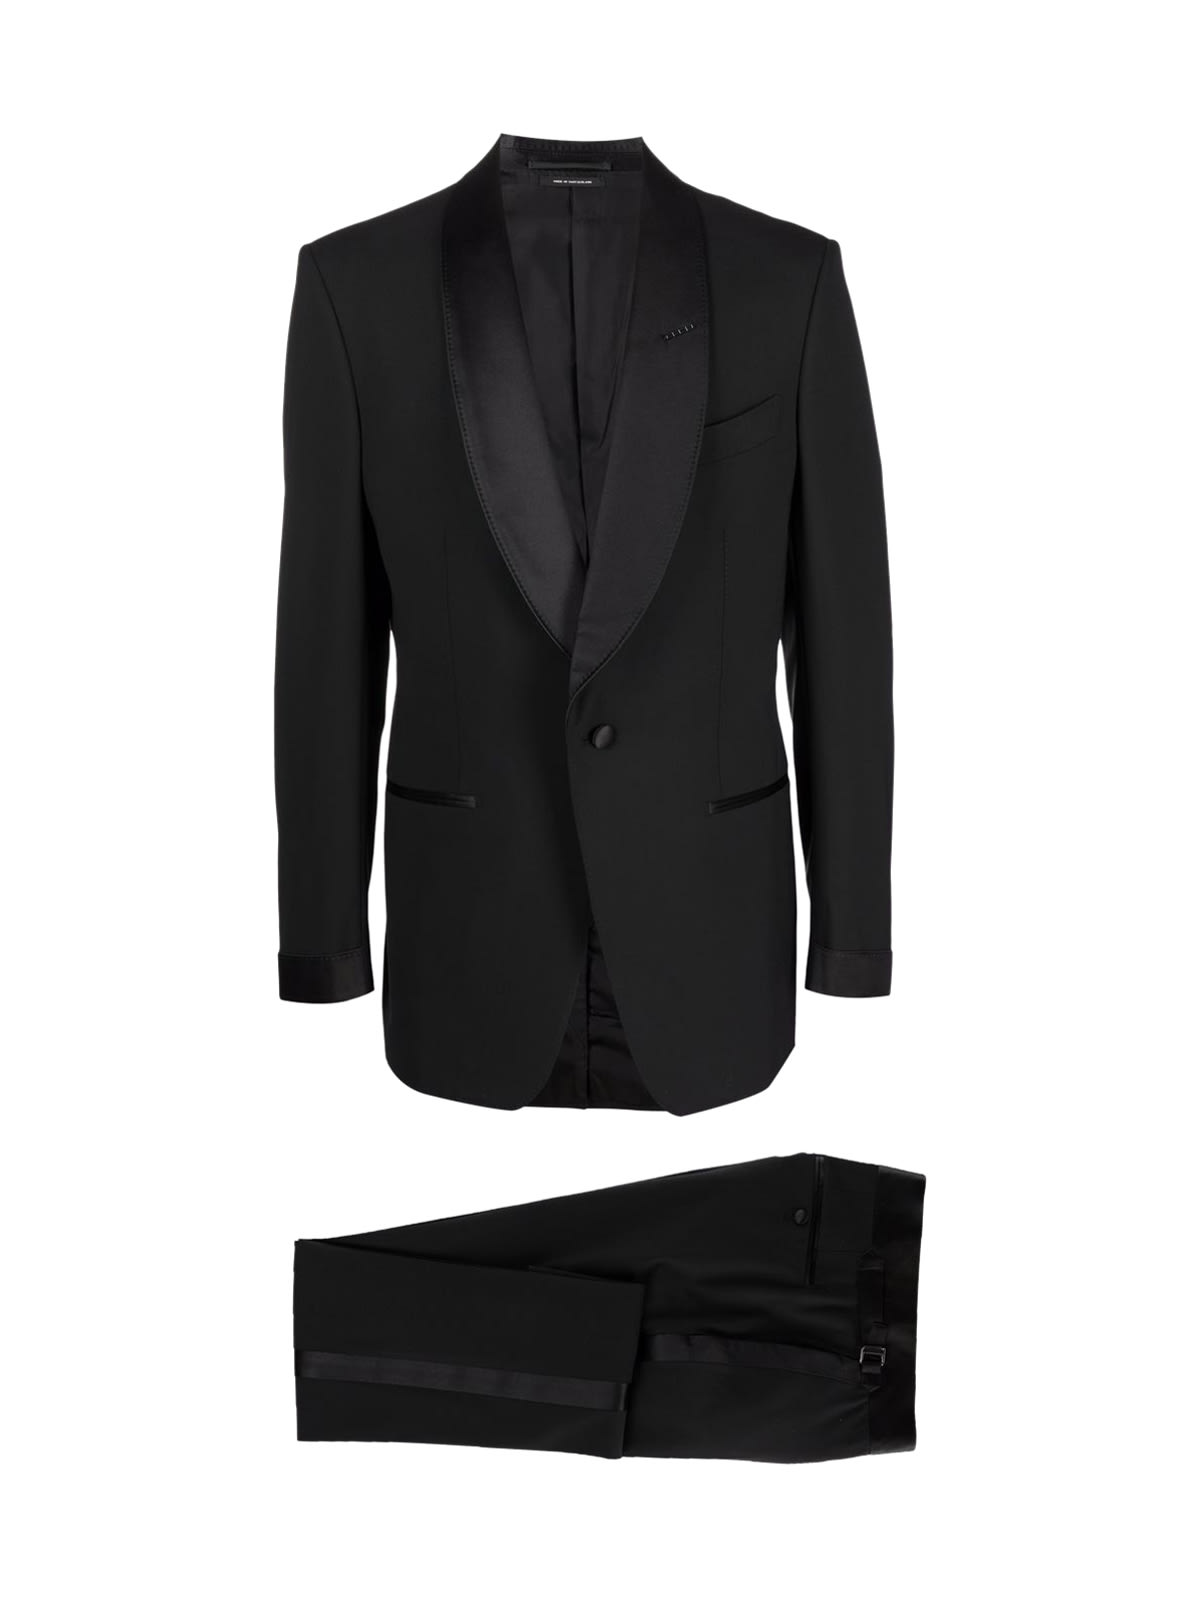 Tom Ford Bistretch Evening Suit